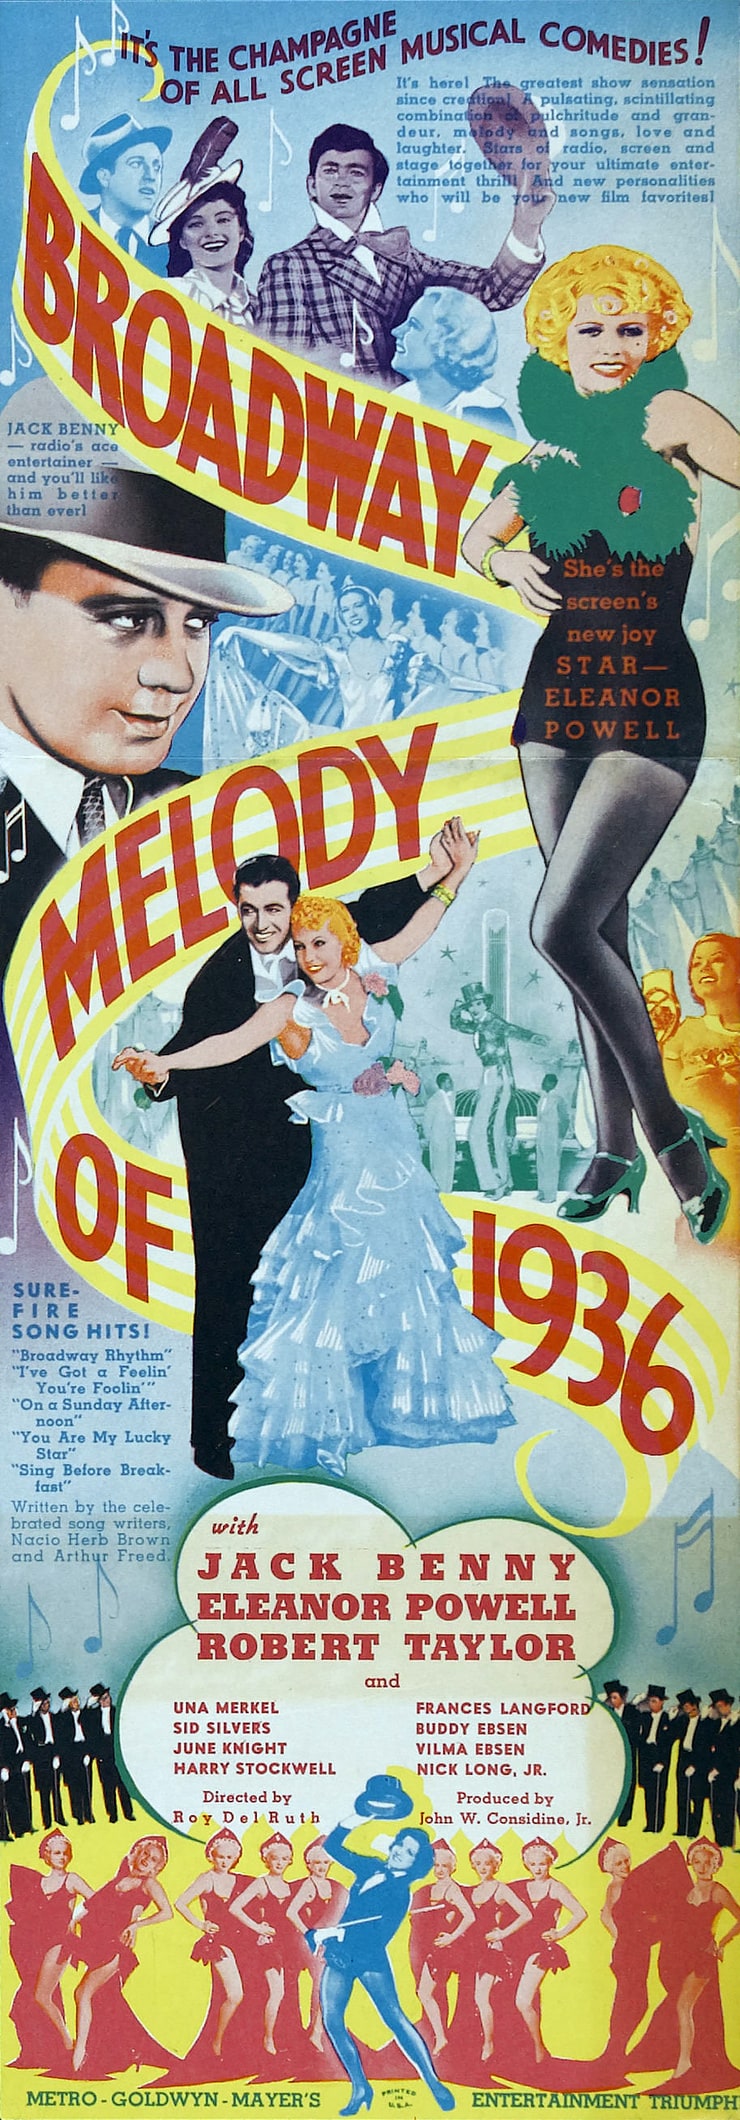 Broadway Melody of 1936